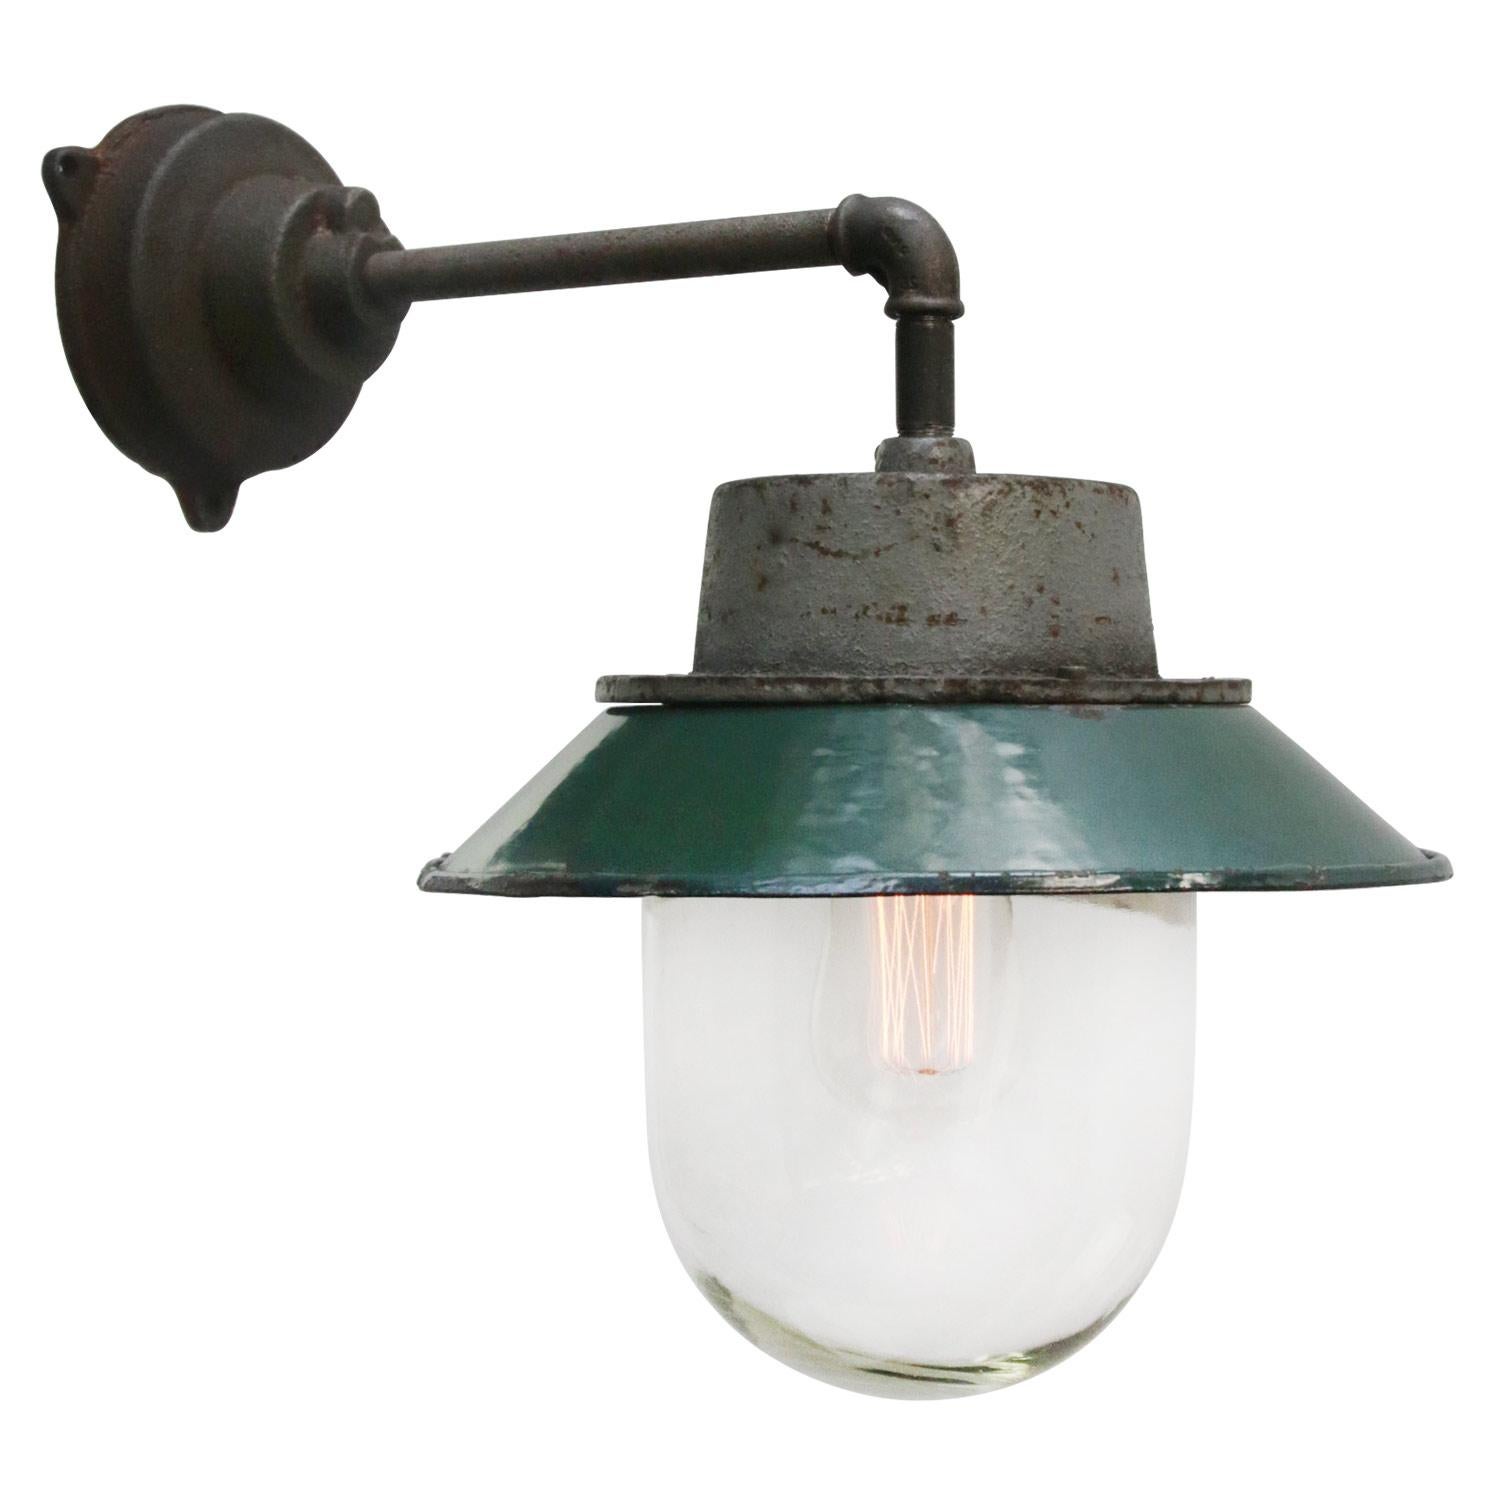 Petrol enamel industrial wall lamp with white interior.
Petrol cast iron top, cast iron arm
Clear glass 

Diameter cast iron wall piece: 12 cm. Three holes to secure.

Weight: 4.00 kg / 8.8 lb

Priced per individual item. All lamps have been